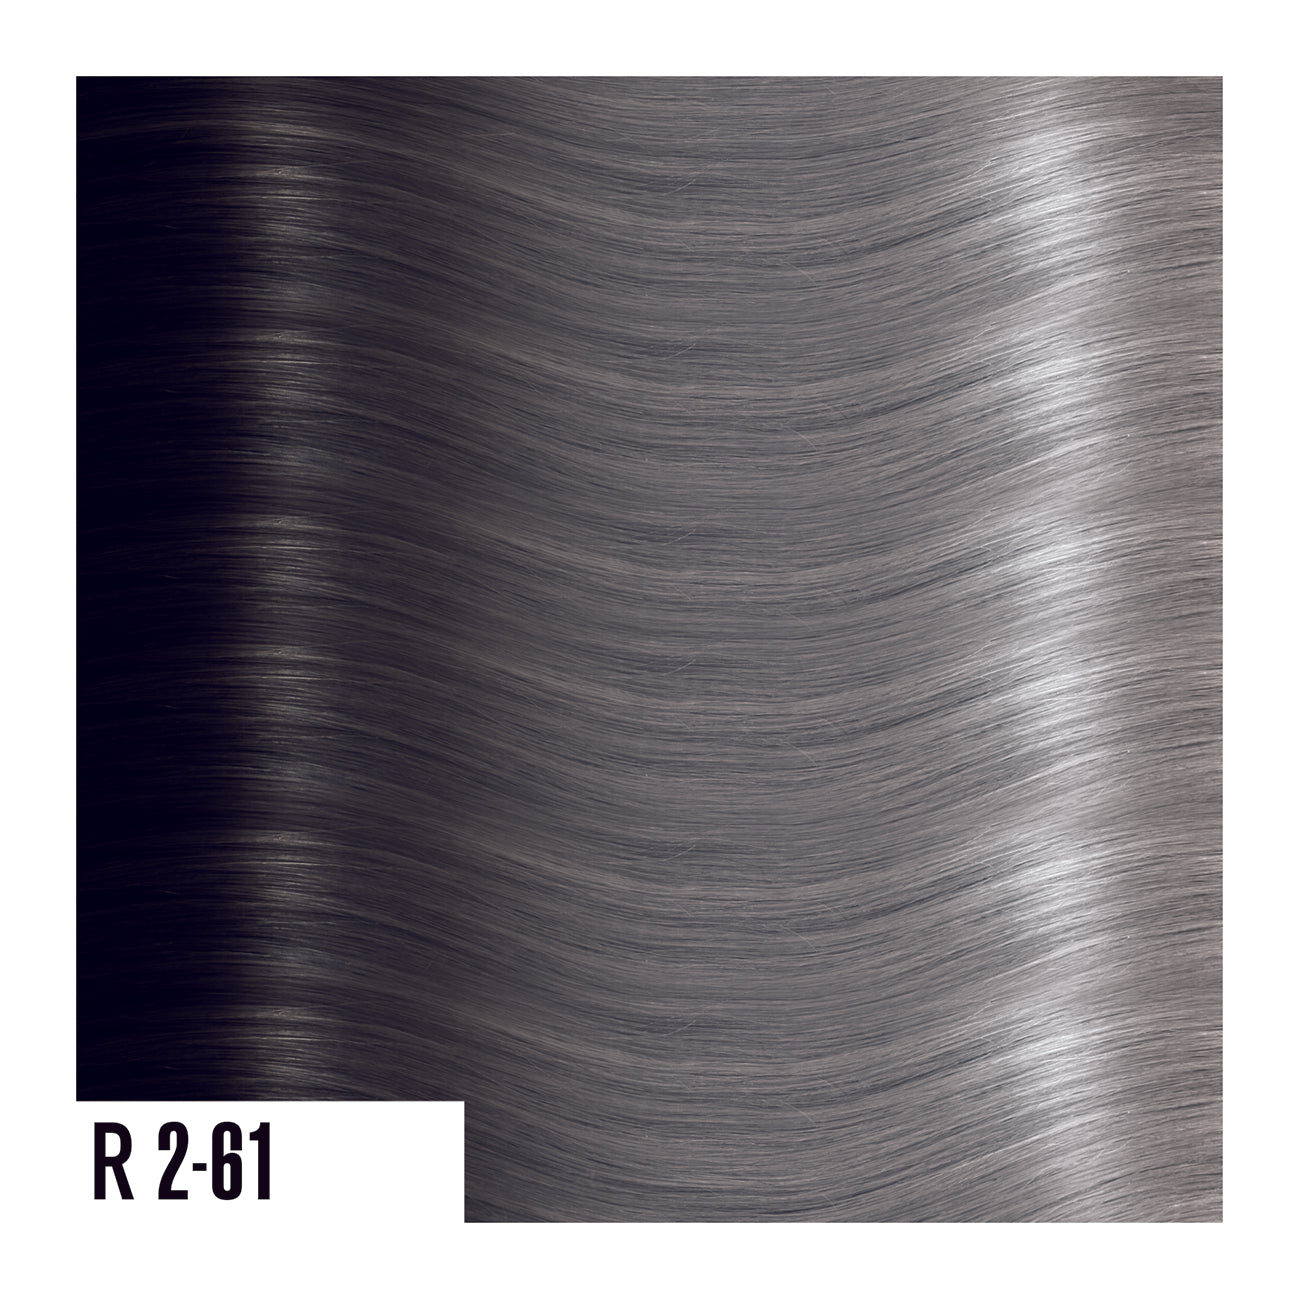 R2-61 - Rooted Prime Tape In Black Fade Into Grey - Ombre colors are a beautiful gradual blend of 3 colors with darker roots and lighter ends. 